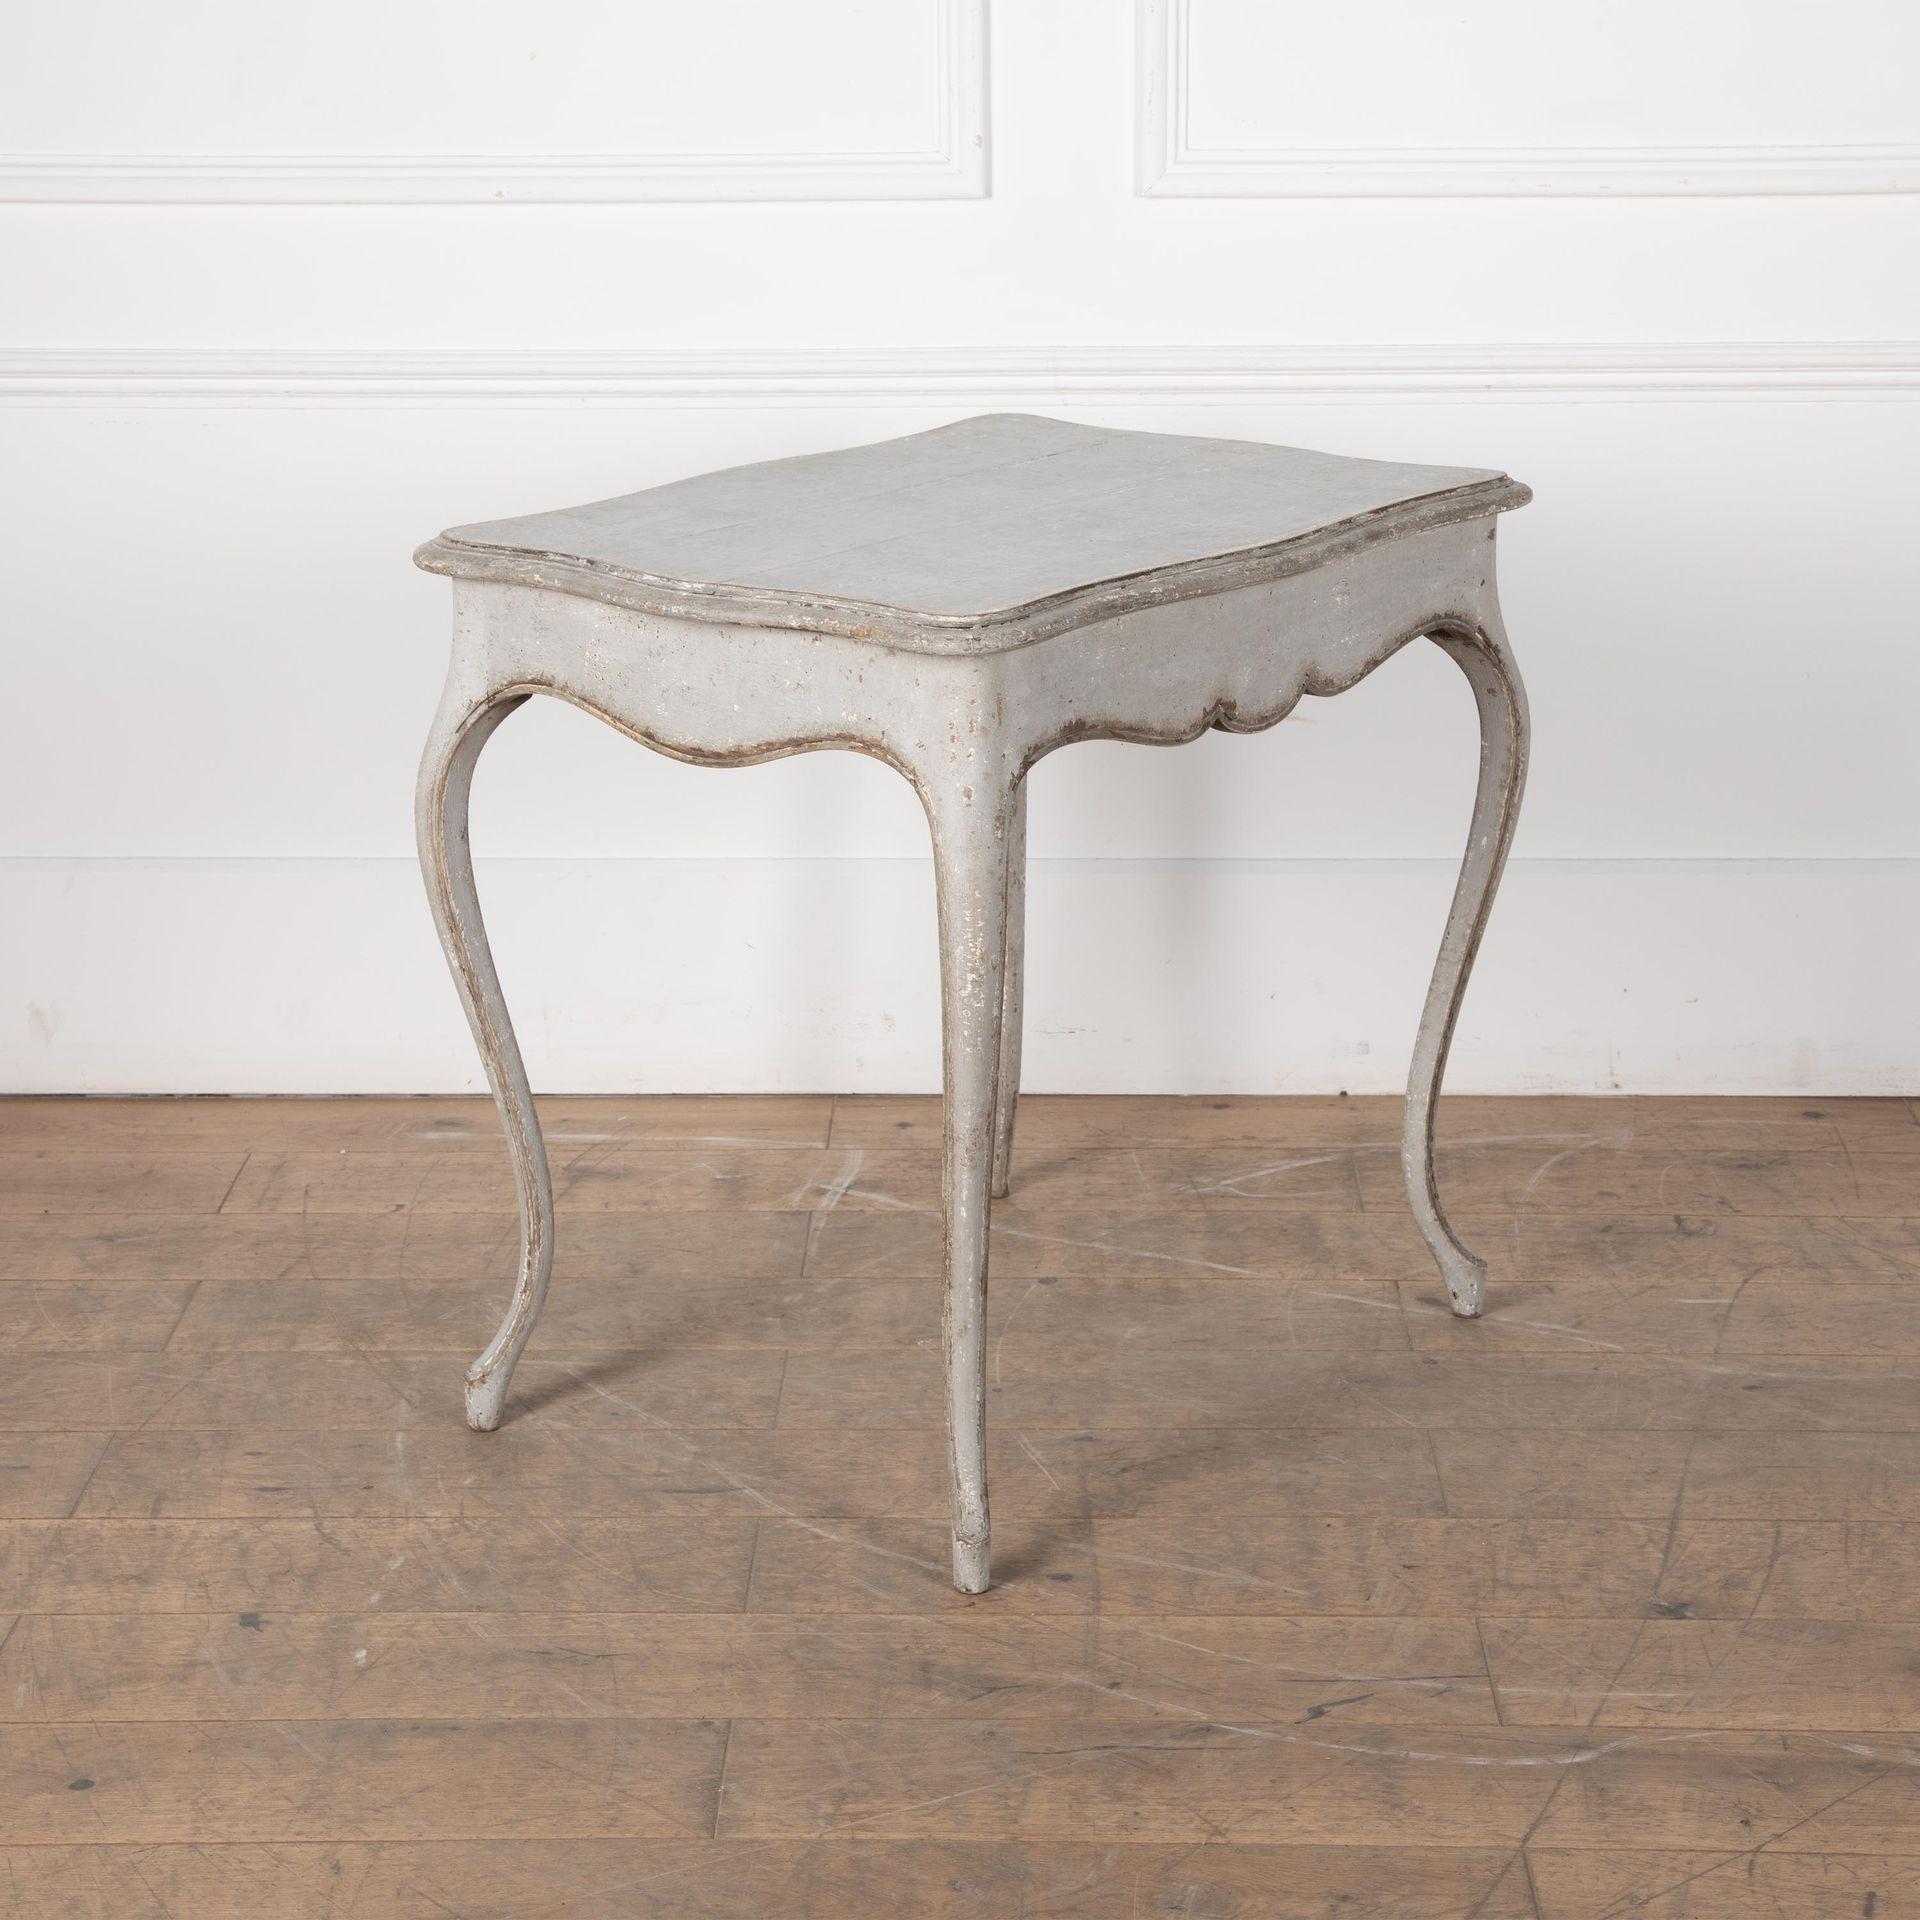 Delightful late 18th Century Provencal side table on cabriole legs with scalloped top and apron.